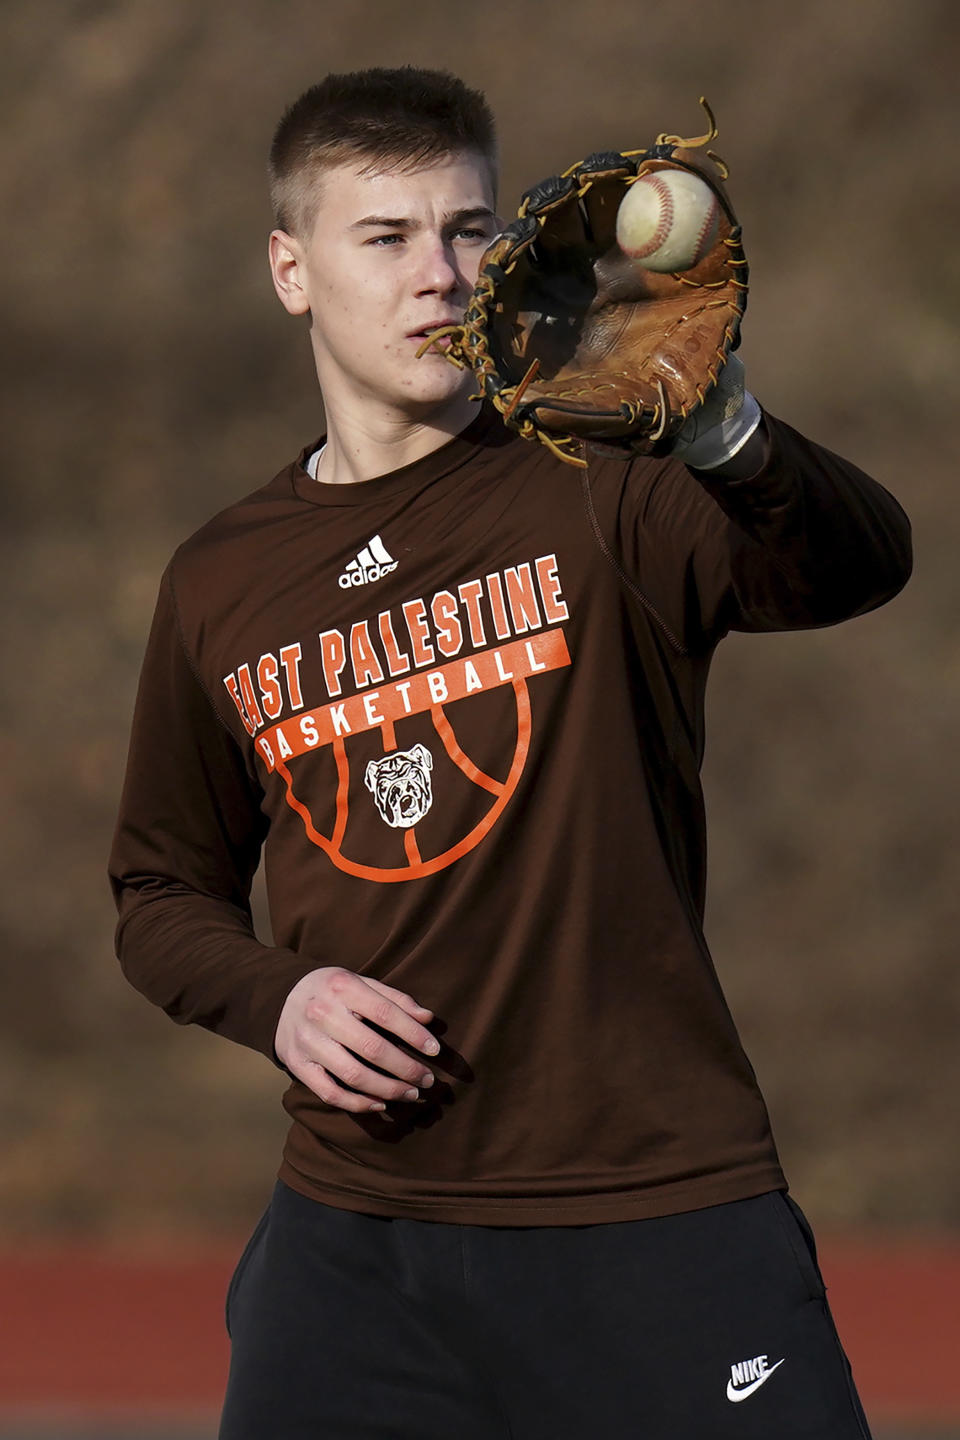 East Palestine High School senior Owen Elliott pulls in a ball during baseball practice, Monday, March 6, 2023, in East Palestine, Ohio. Athletes are navigating spring sports following the Feb. 3 Norfolk Southern freight train derailment. (AP Photo/Matt Freed)